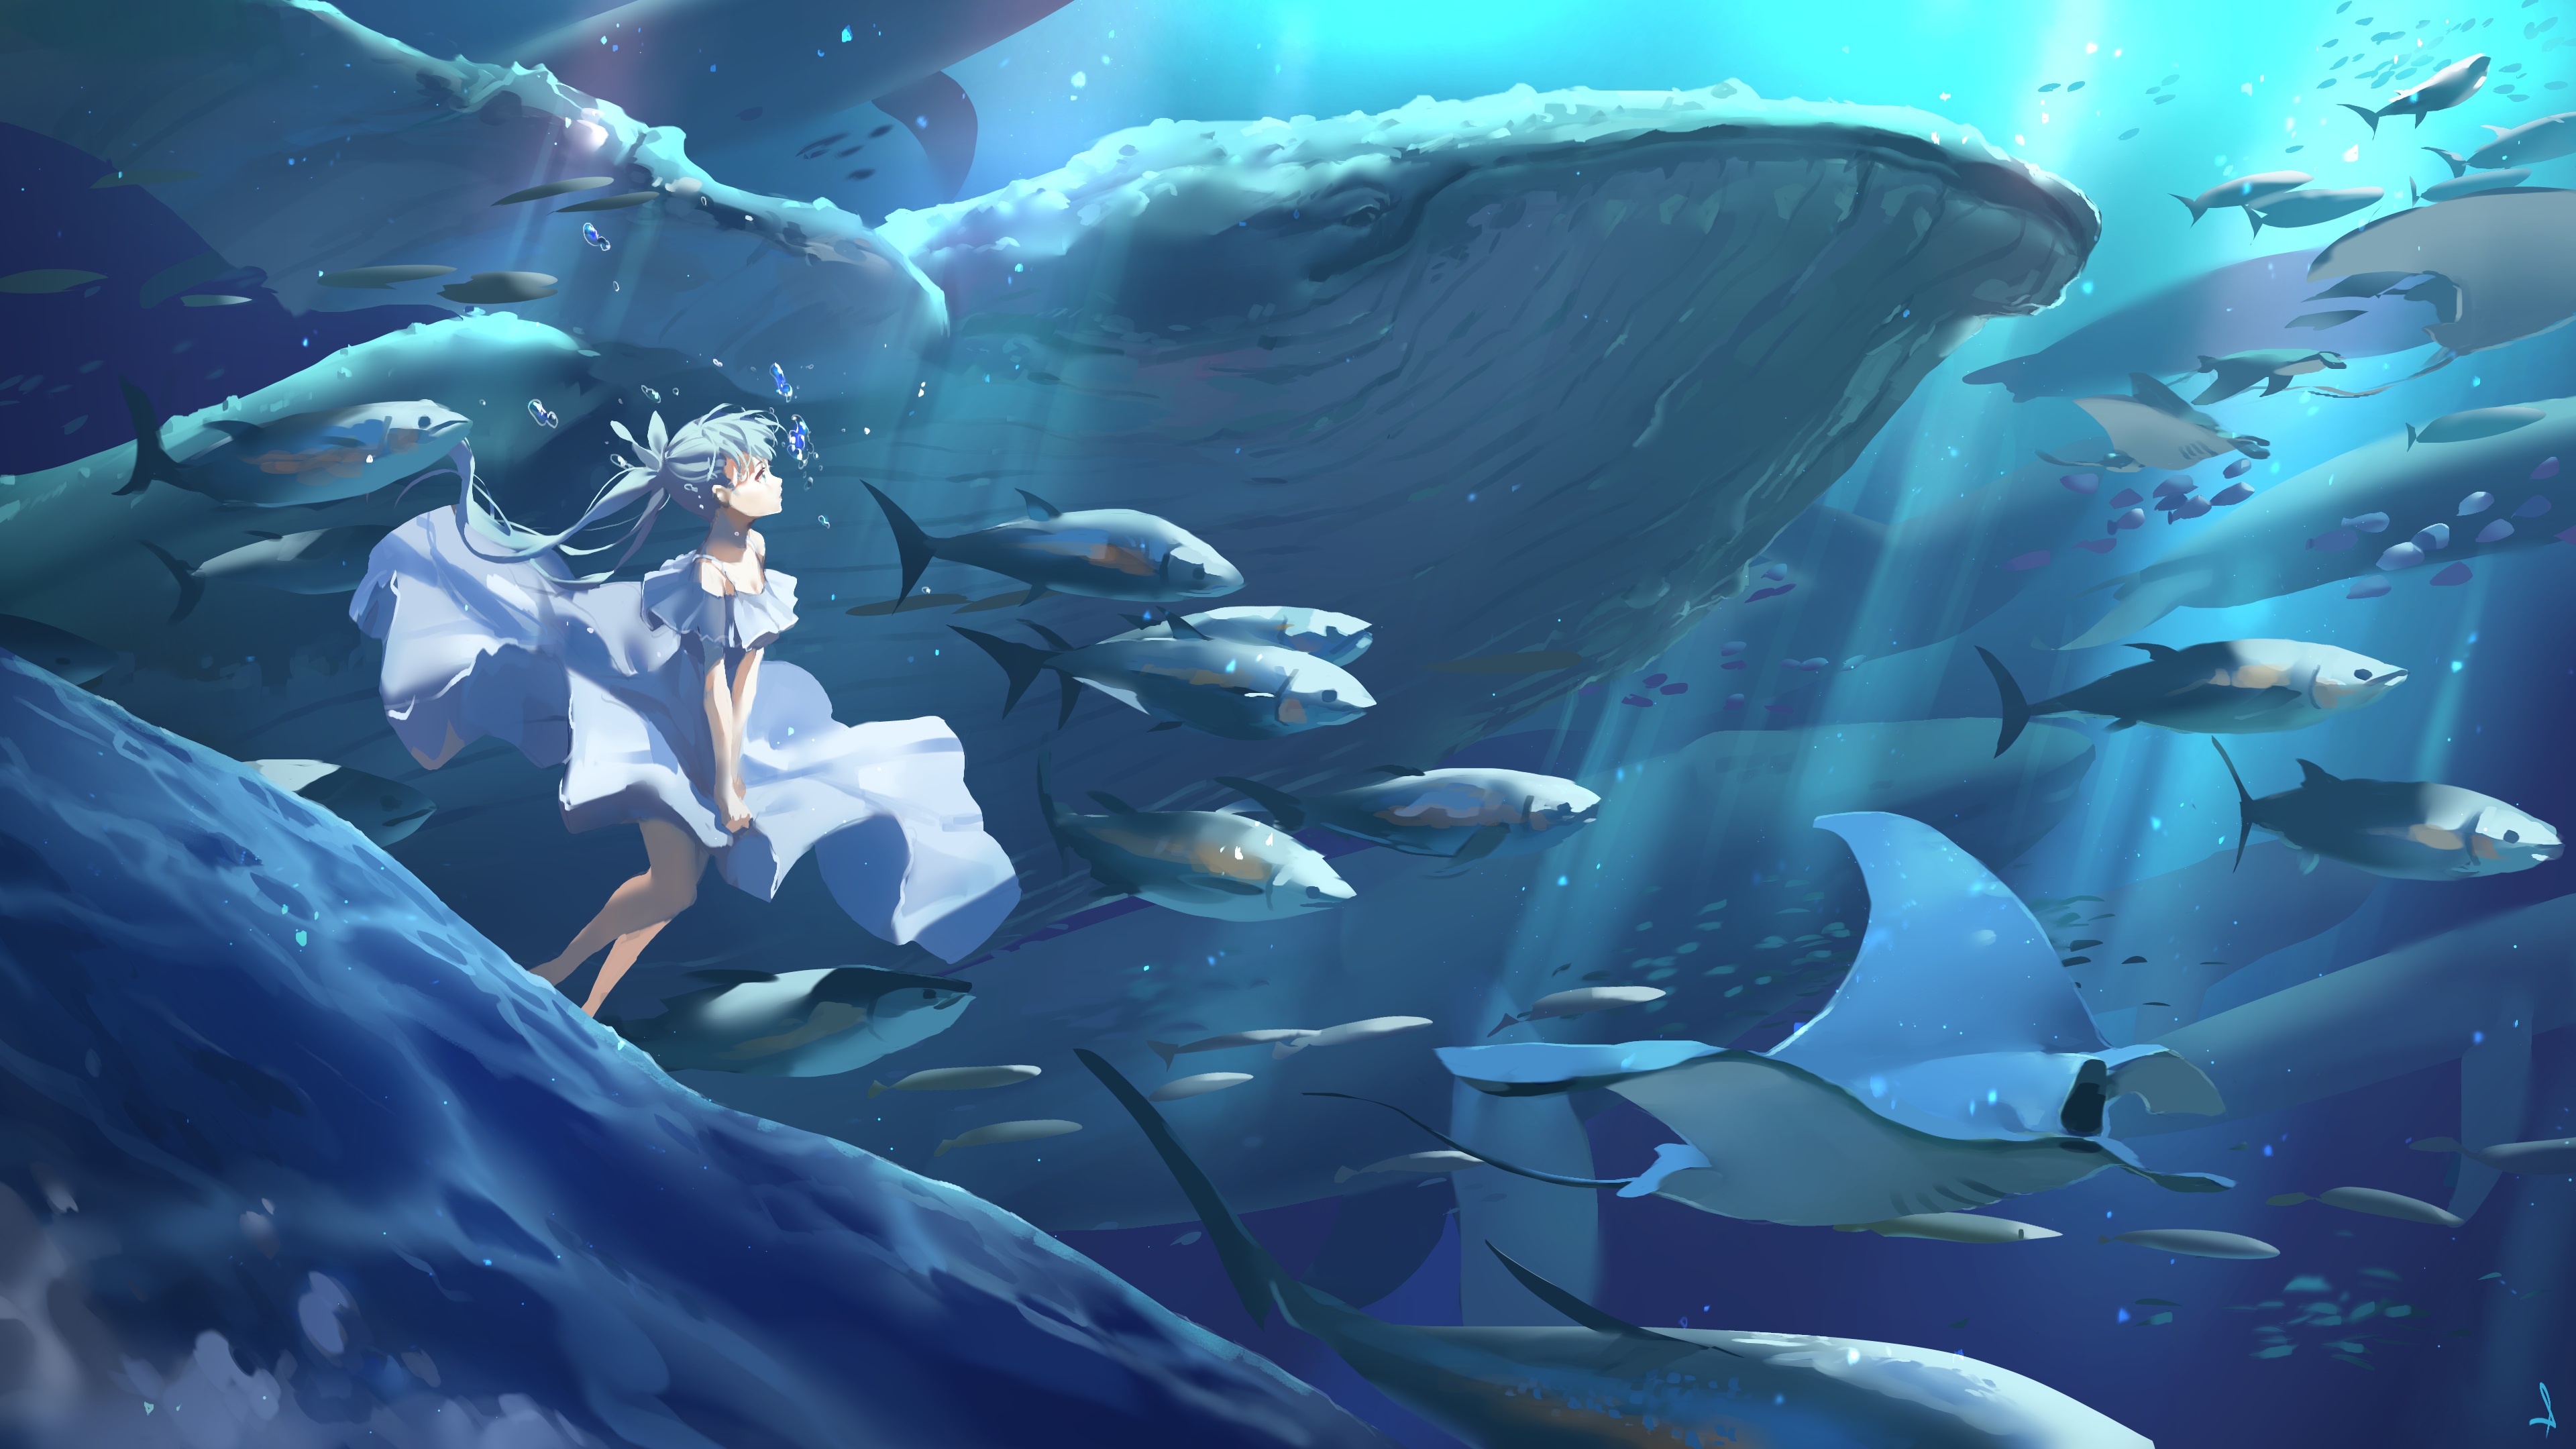 Anime Girl Underwater With Sealife by Shijohane